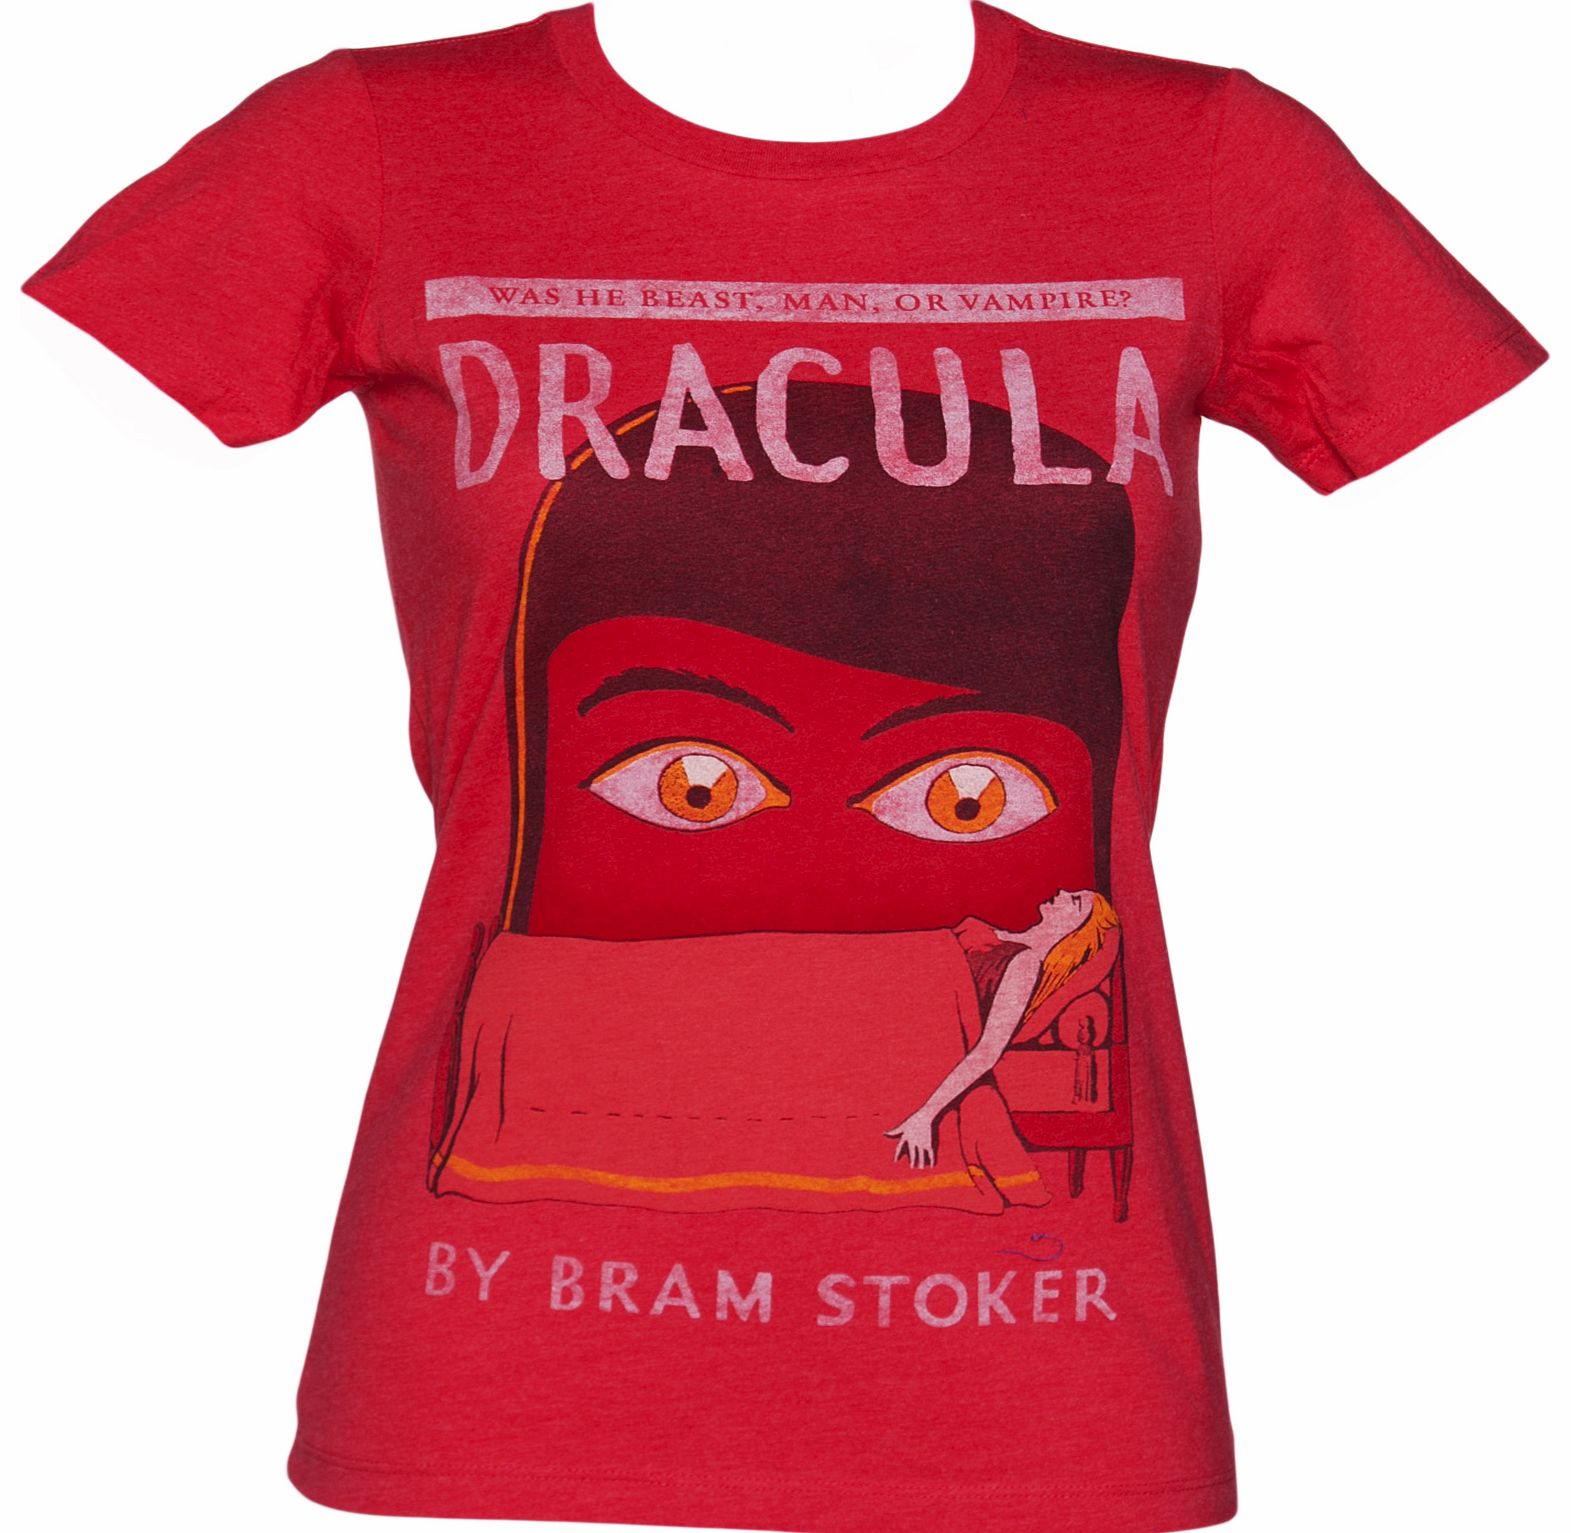 Ladies Red Dracula By Bram Stoker T-Shirt from